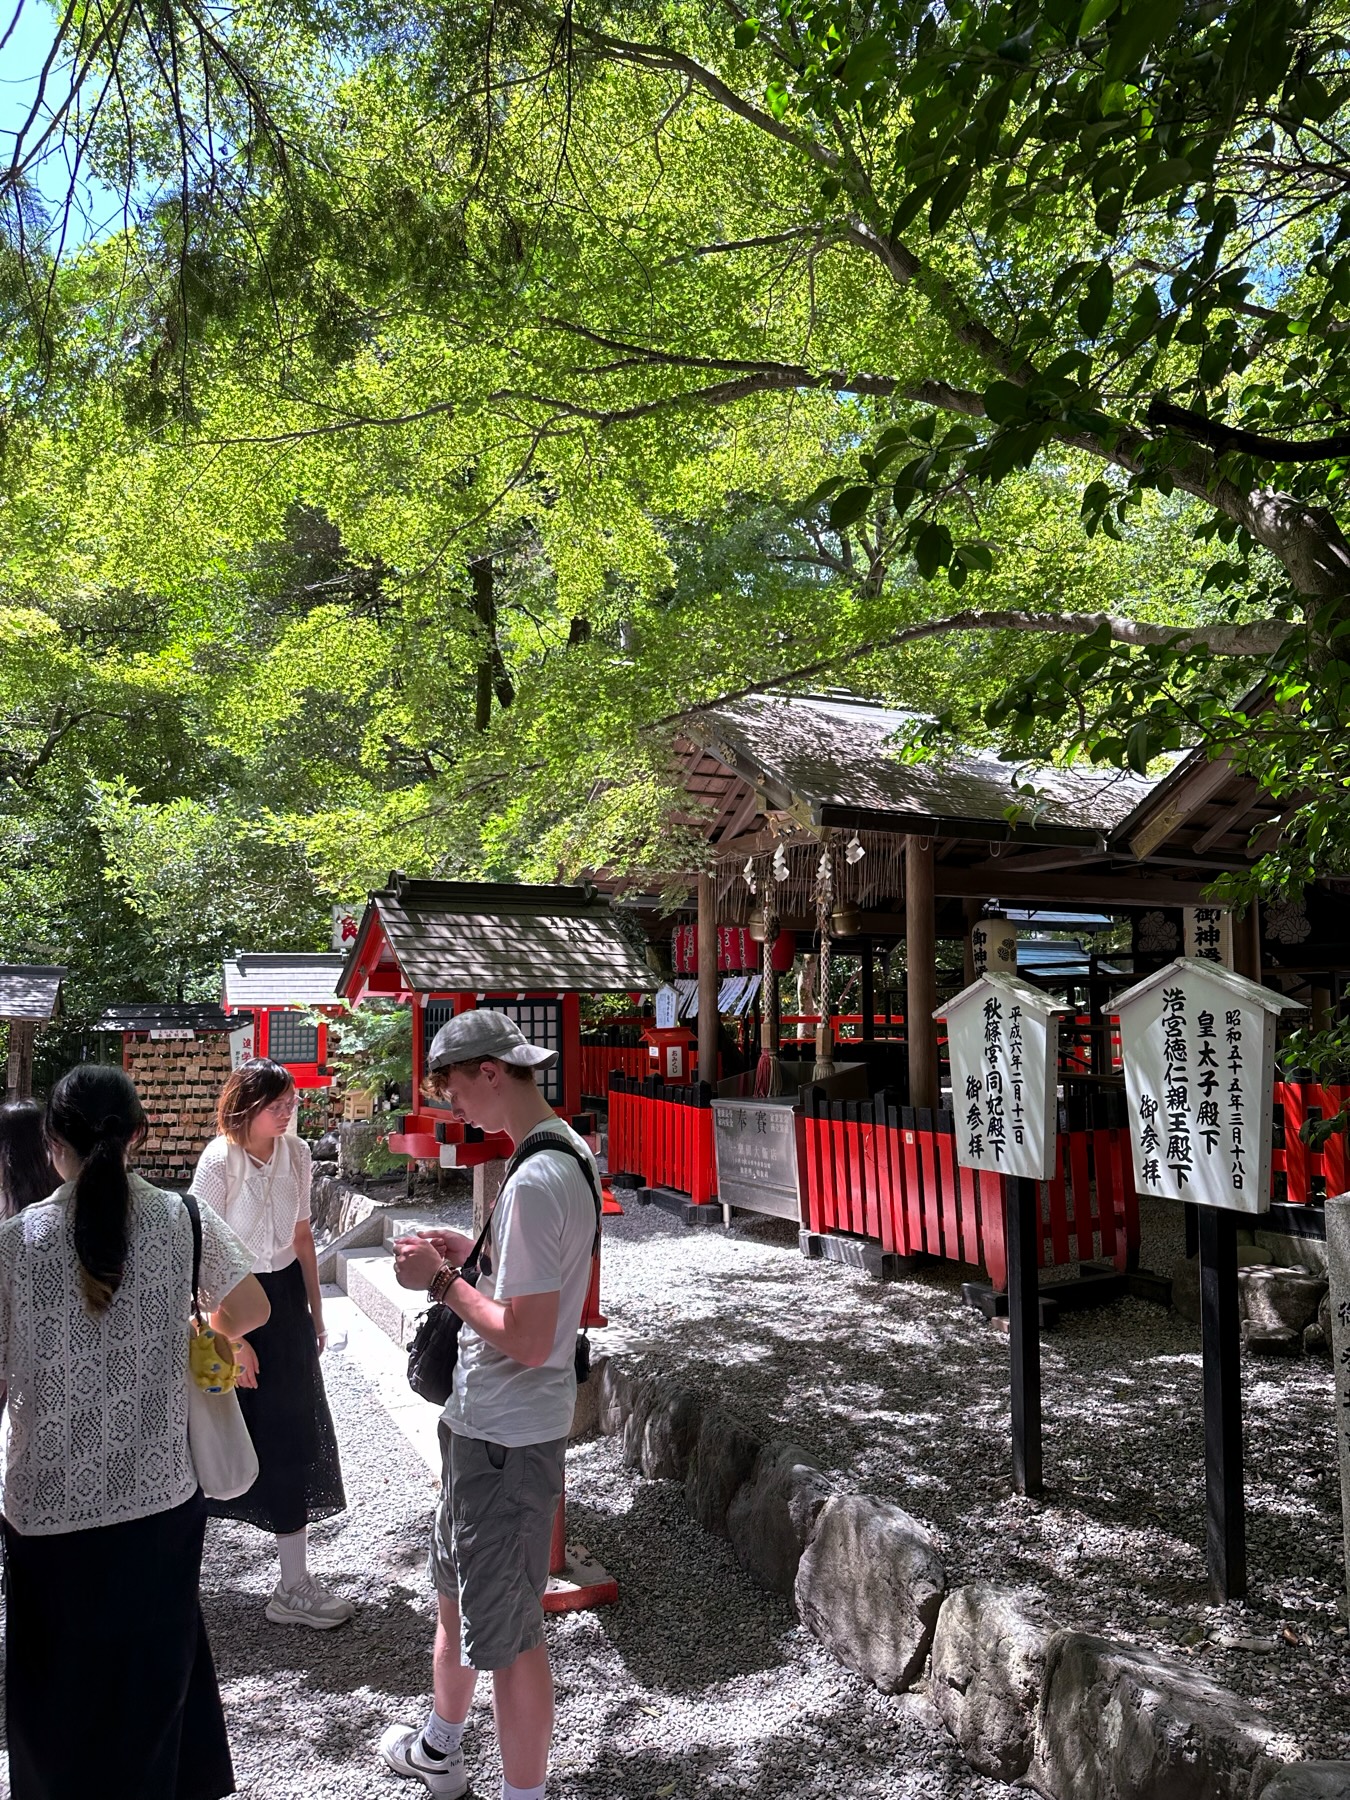 The entrance to the bamboo forest shrine. Red small fences and small covered areas